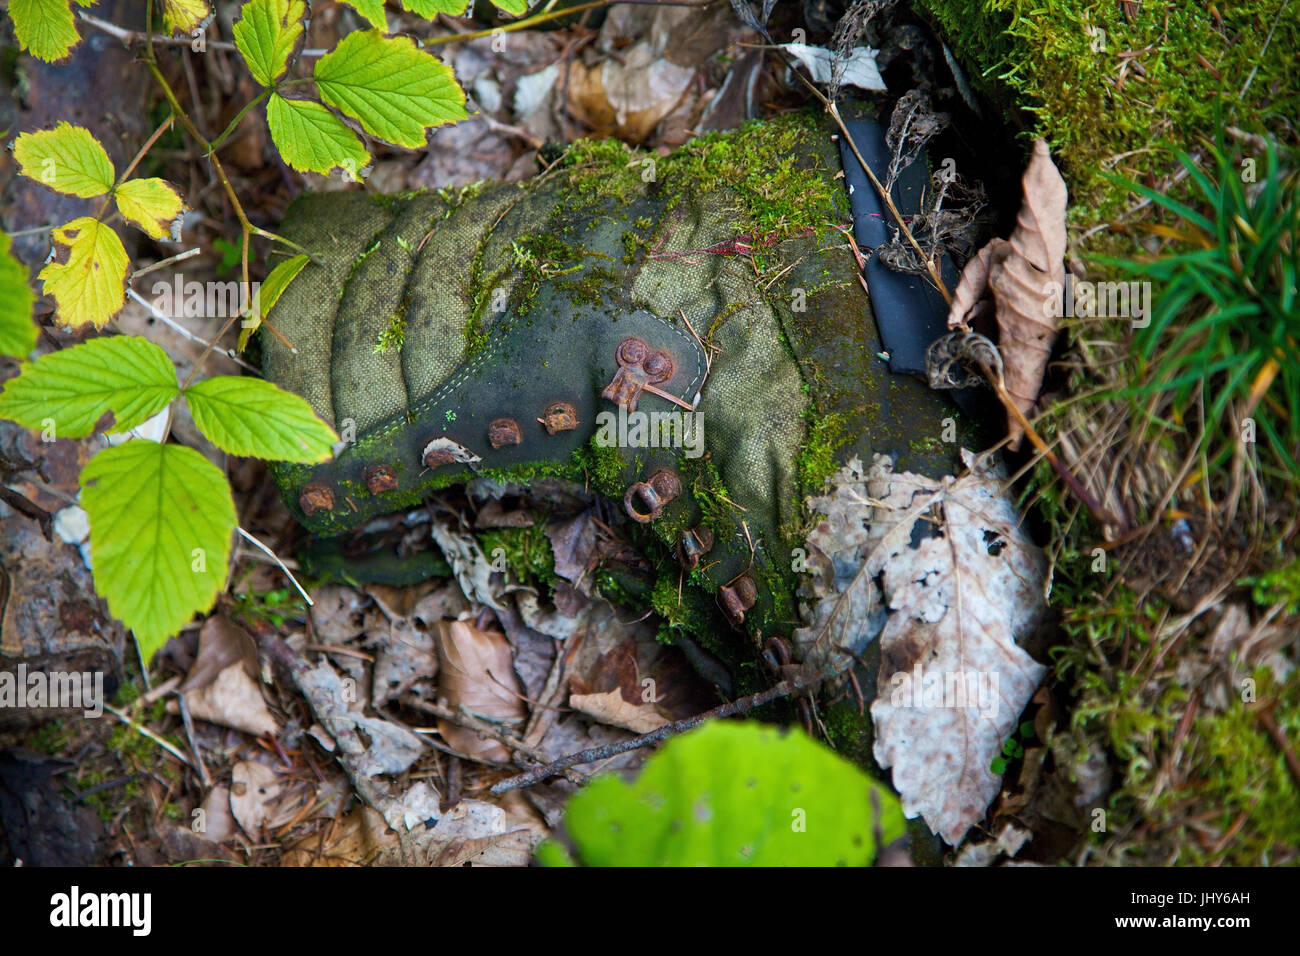 Travelling shoe rots in the wood - Rotting hiking boat, Wanderschuh verrottet im Wald - Rotting hiking boot Stock Photo